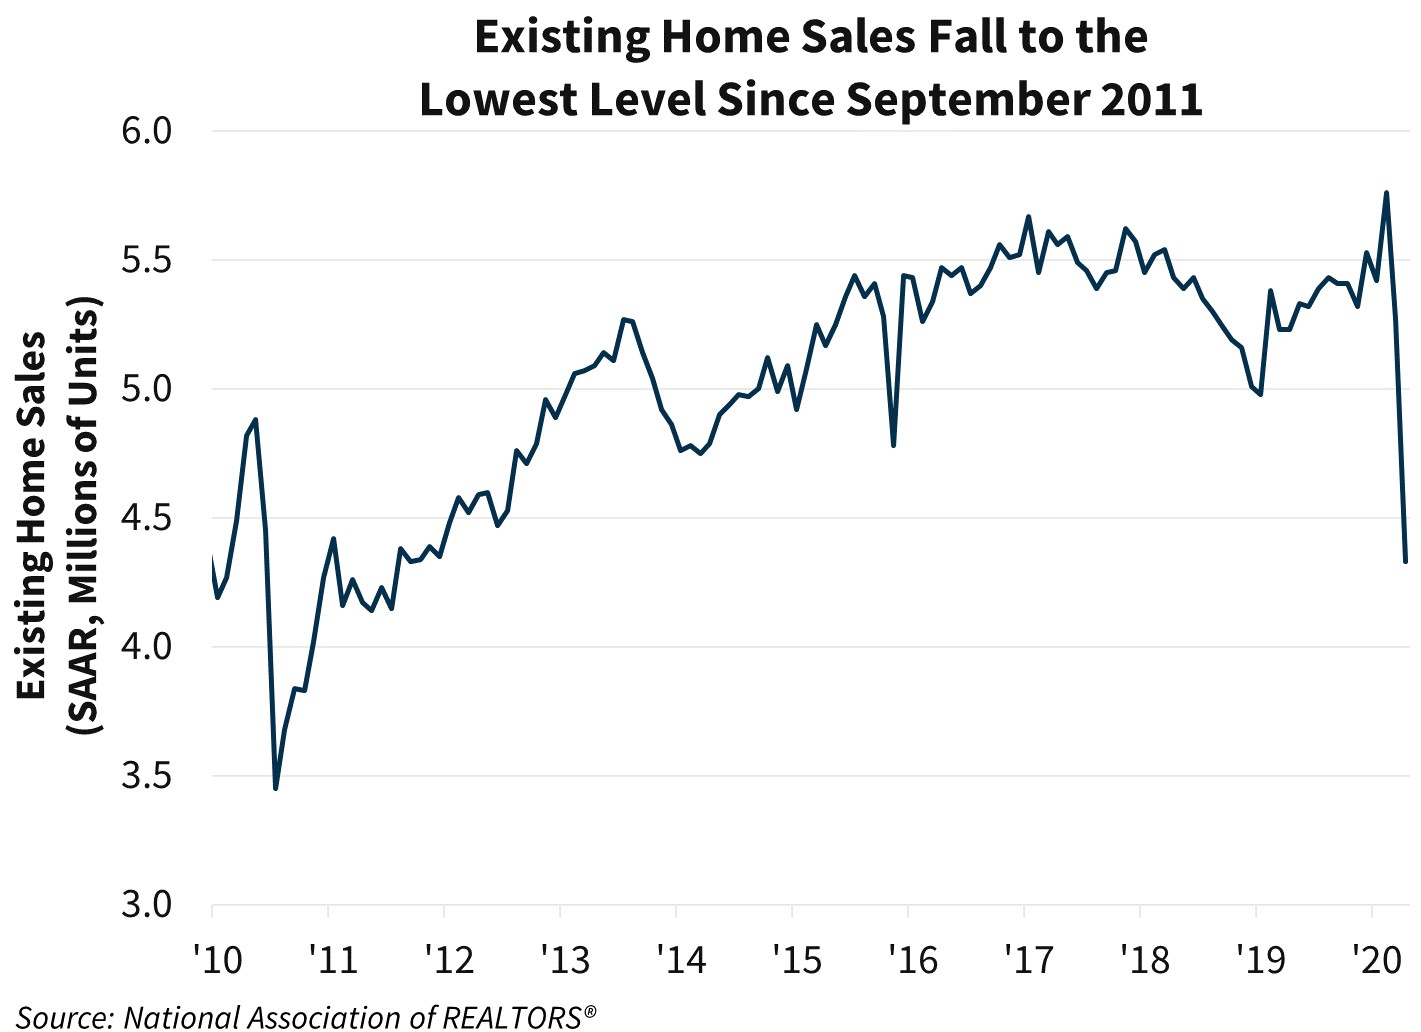 Existing Home Sales fall to the Lowest Level Since September 2011